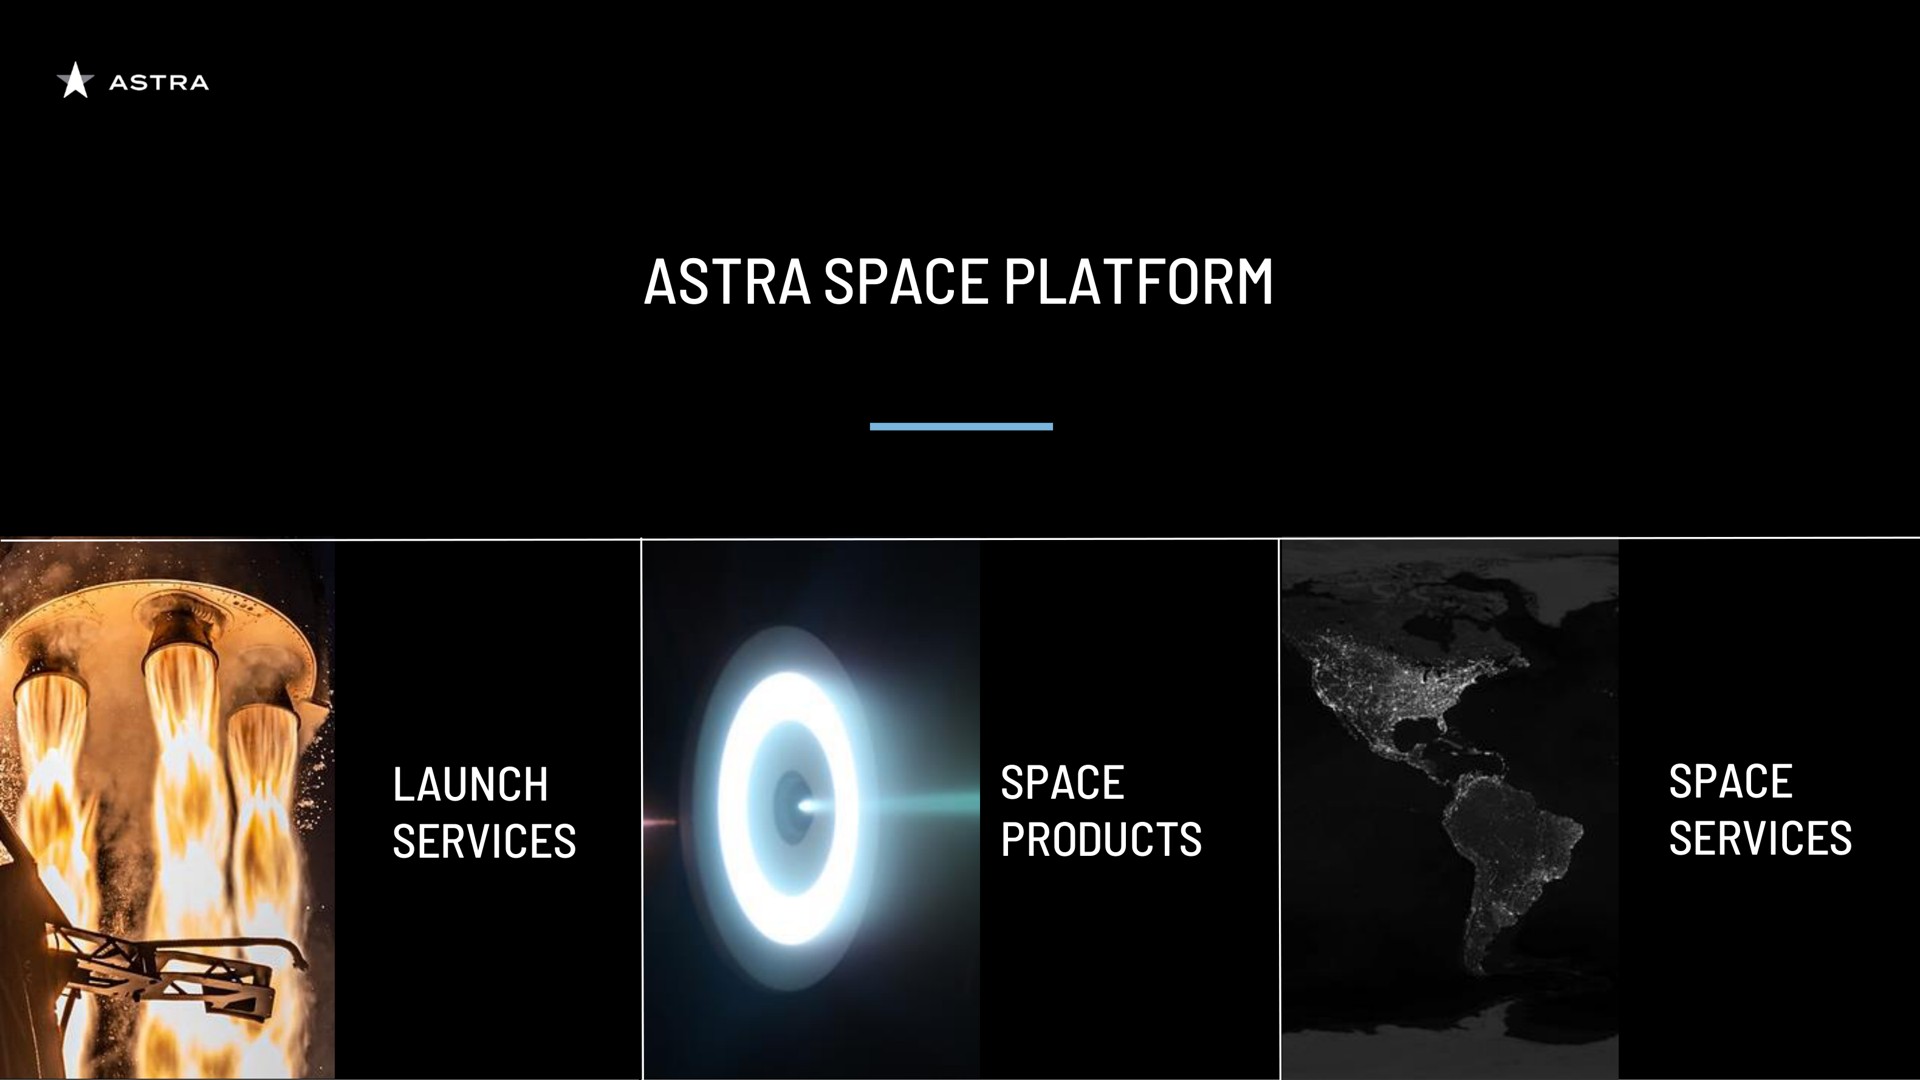 space platform launch services space products space services | Astra